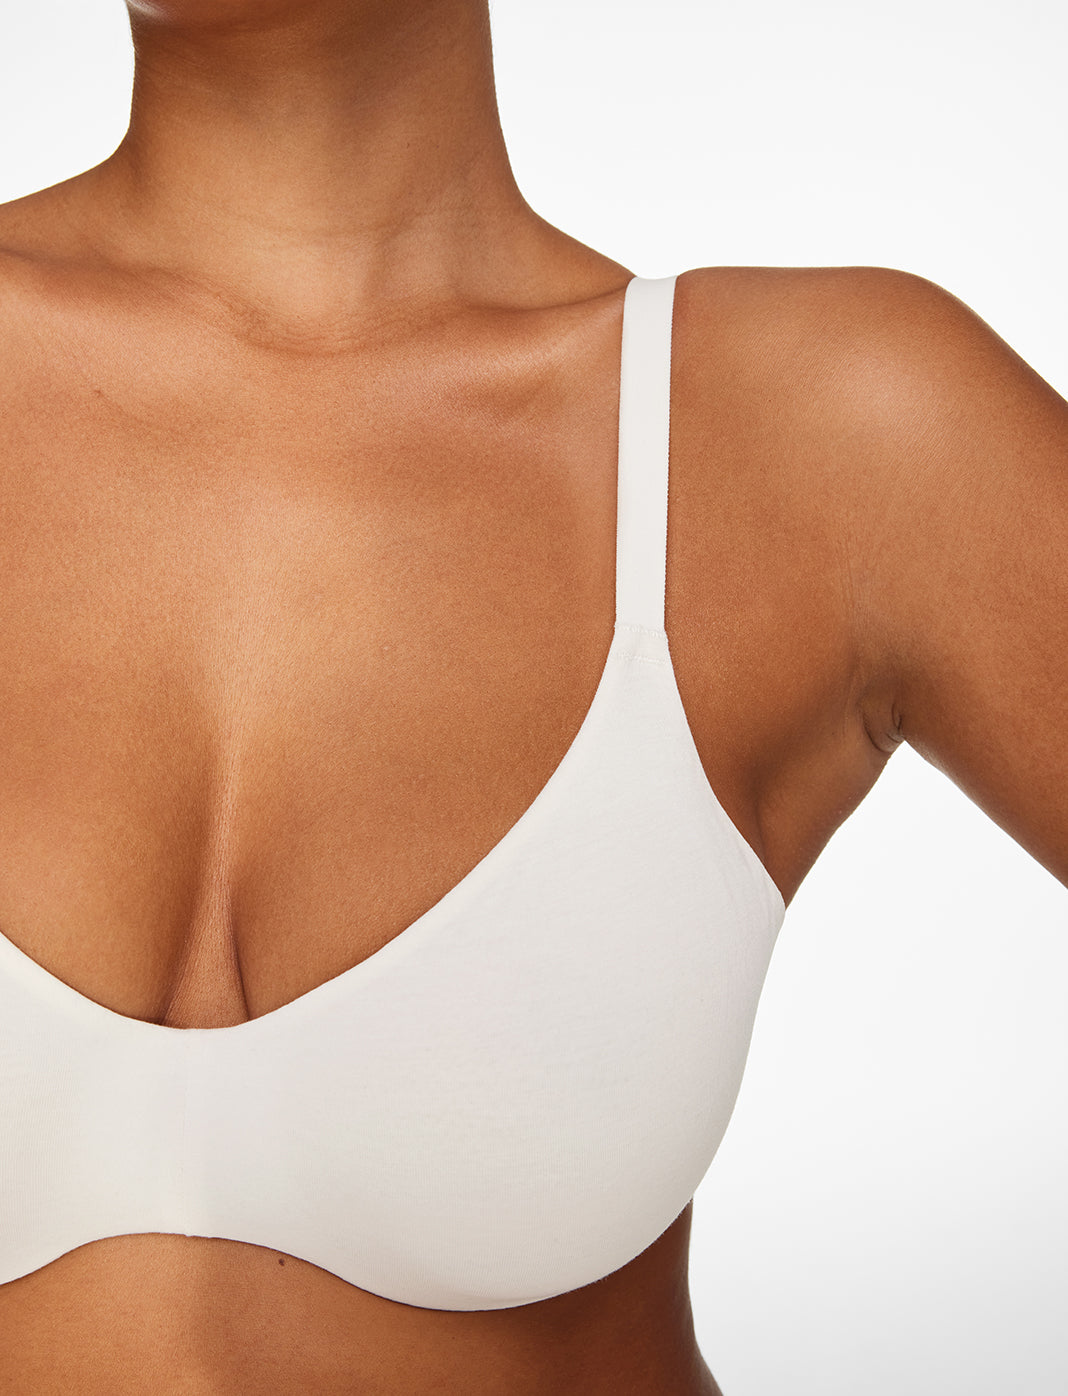 Organic Cotton T-shirt bra - Launch of the long-awaited moulded